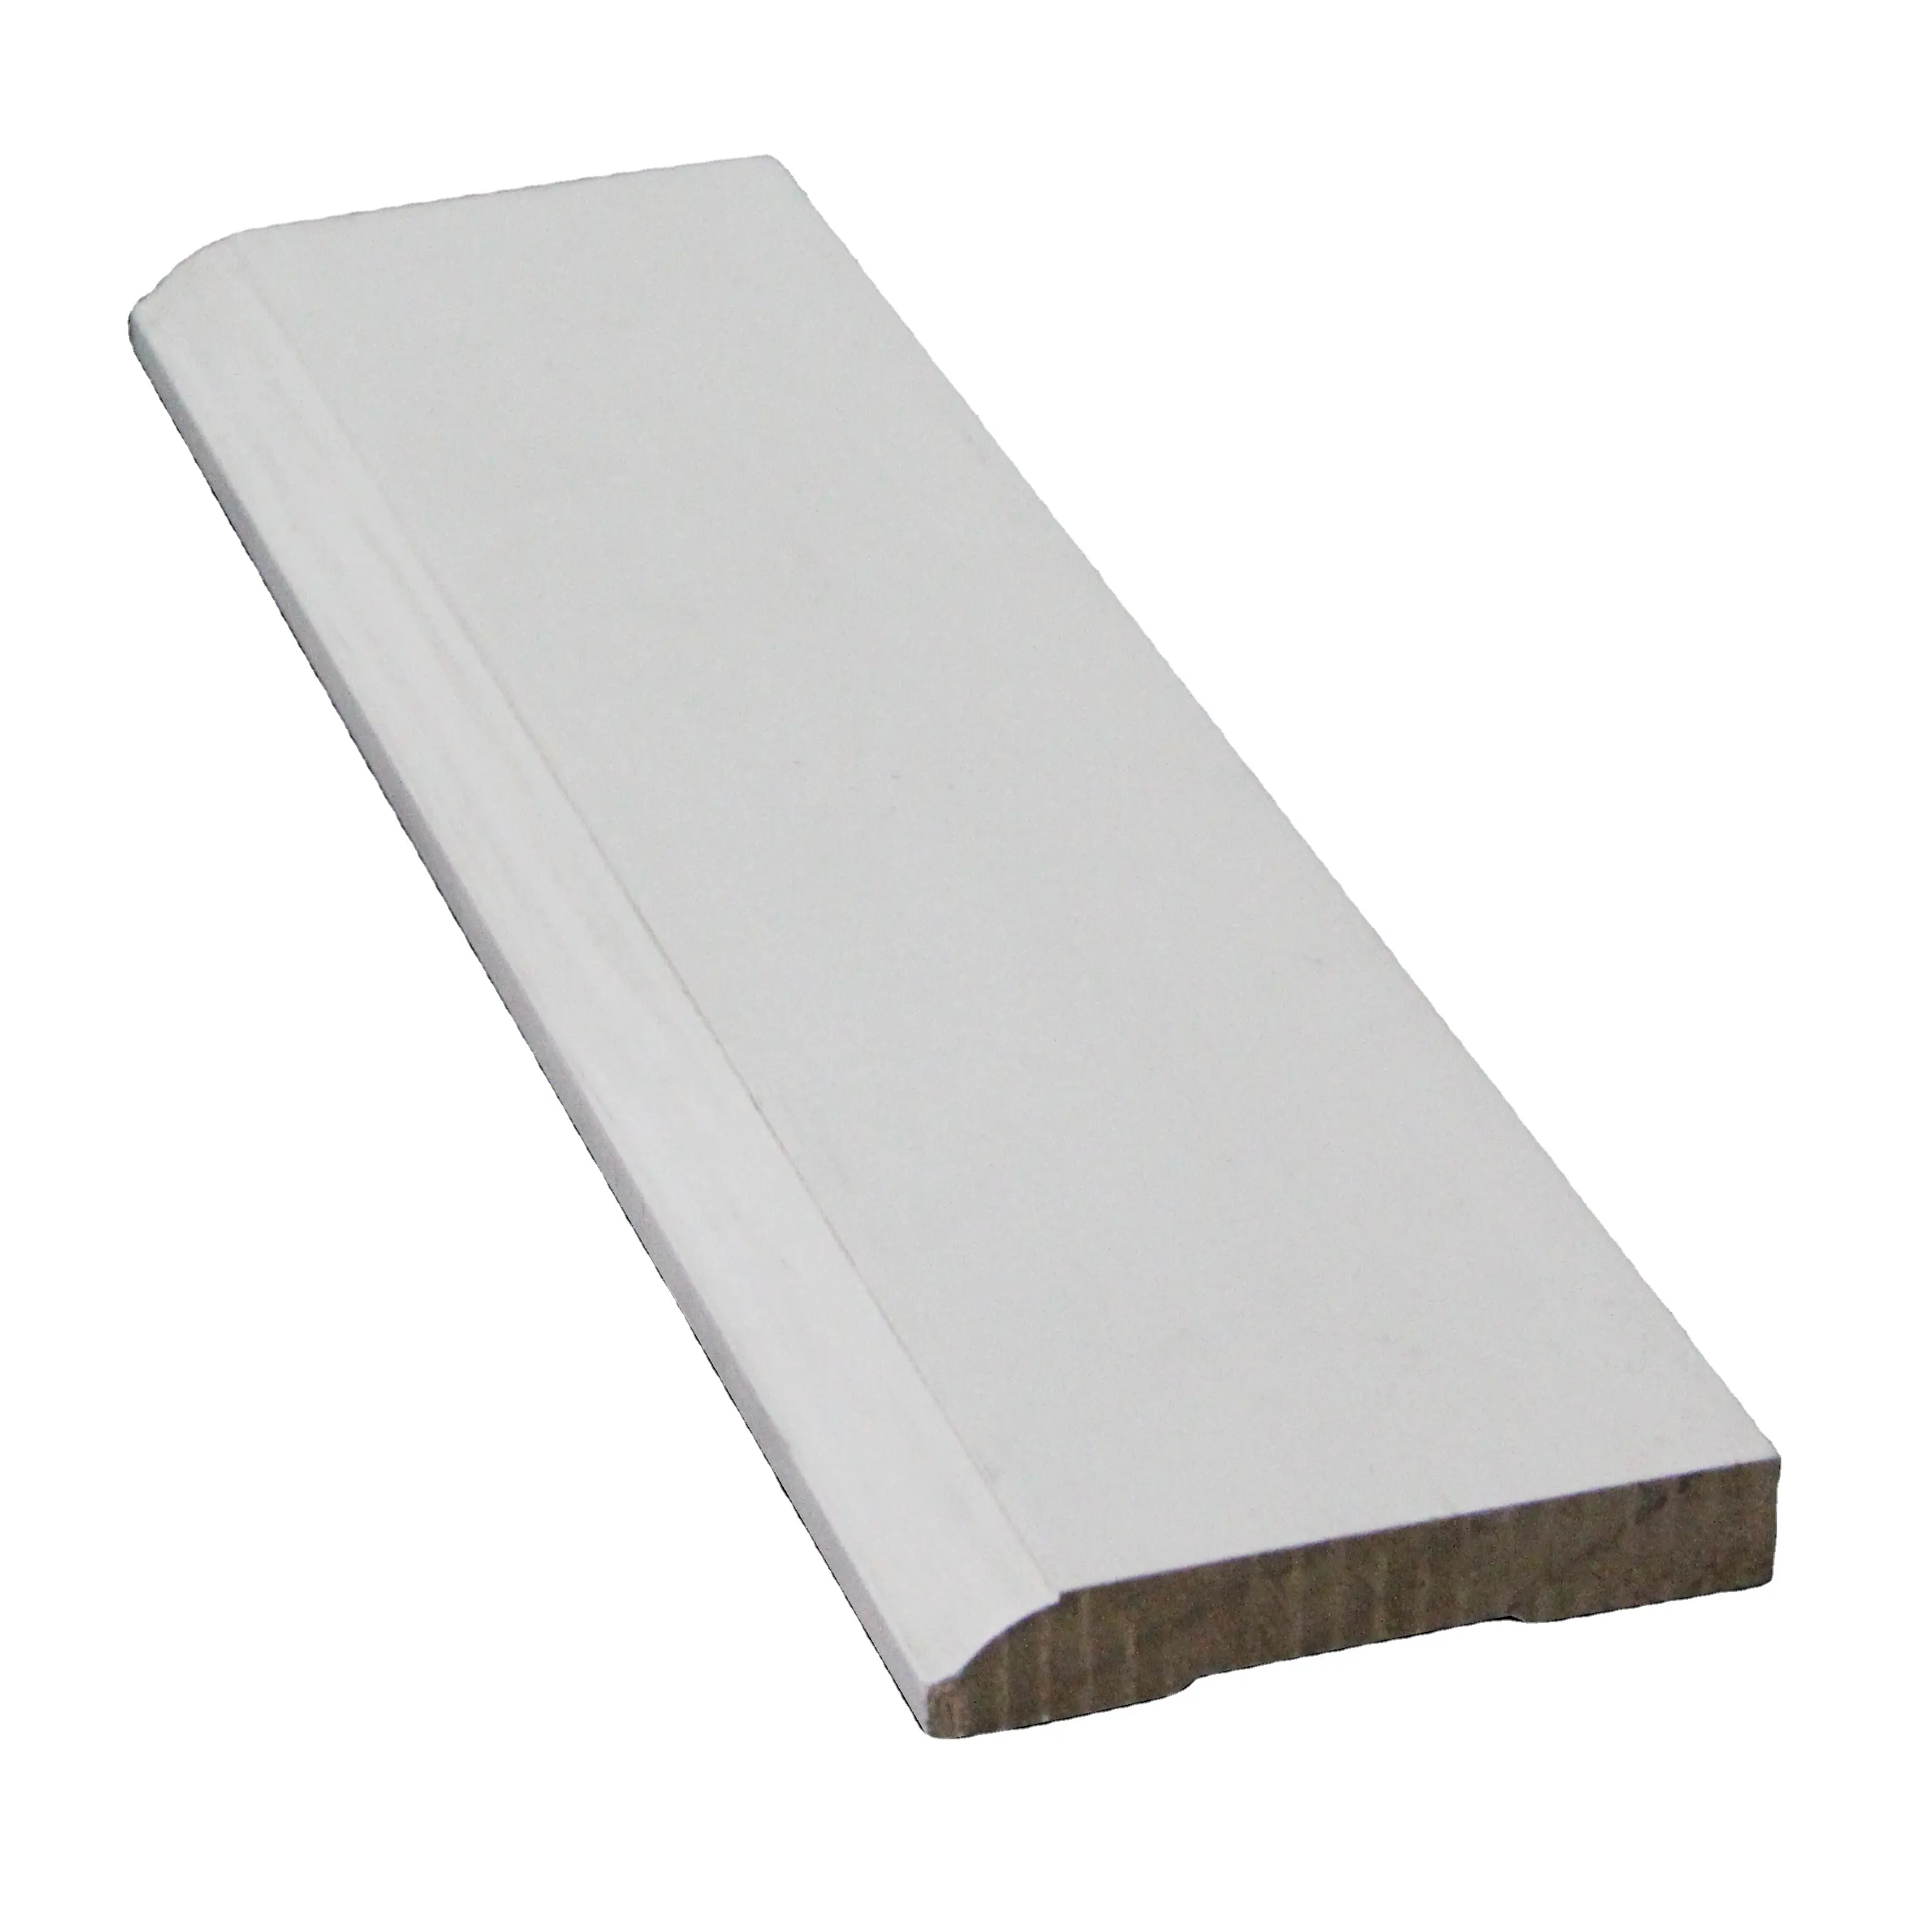 Baseboard Profile 80mm Decorative Wall Skirting Protector Skirting Board Coat Accessories OEM Customized